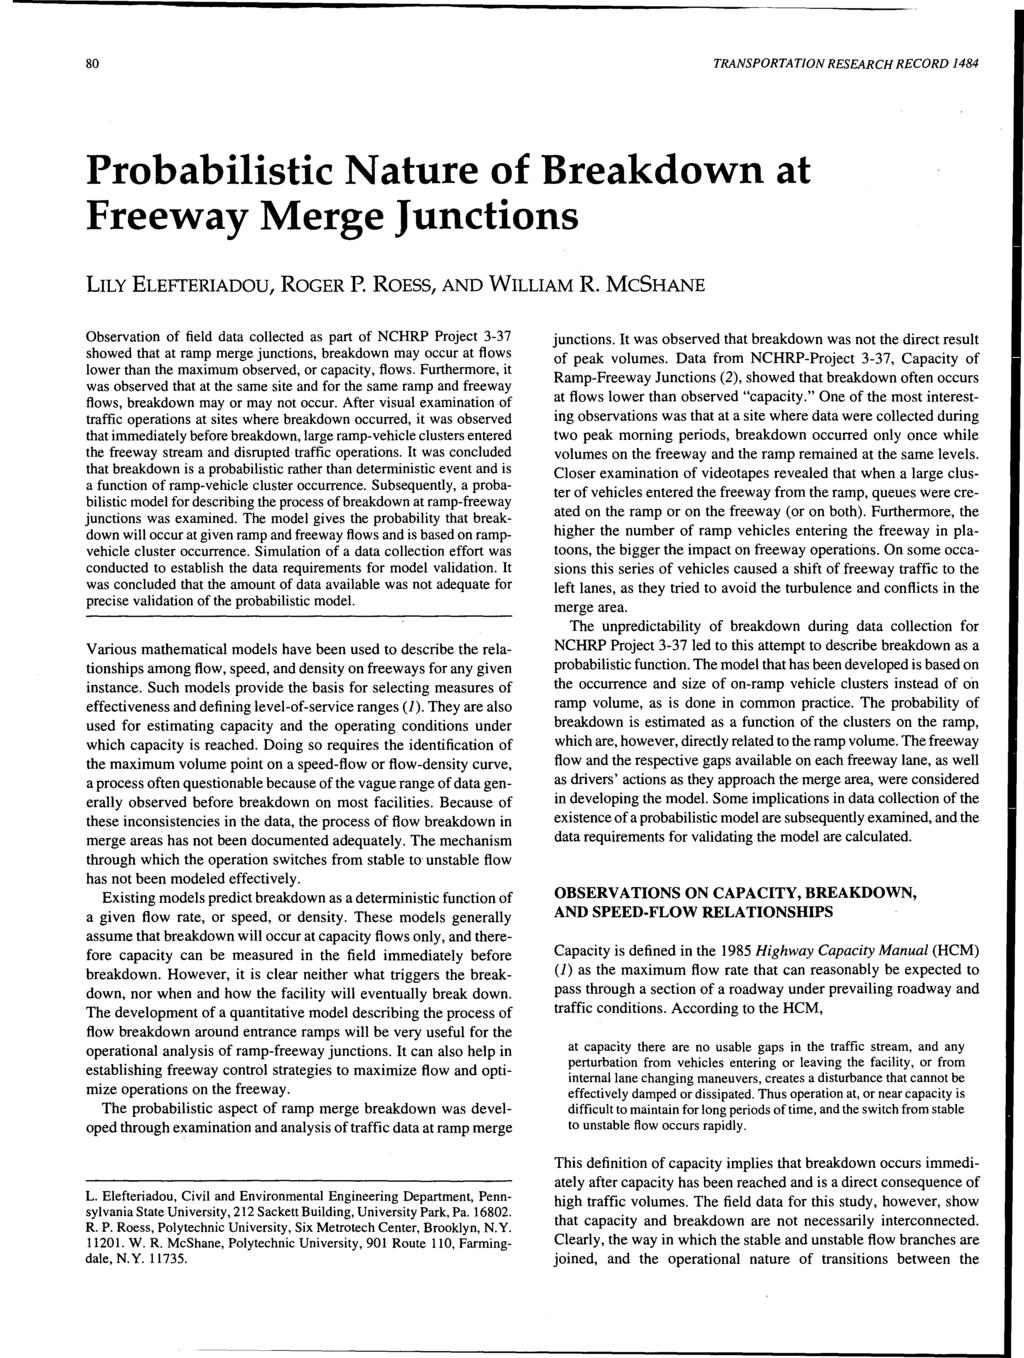 8 TRANSPORTATION RESEARCH RECORD 1484 Probabilistic Nature of Breakdown at Freeway Merge Junctions LILY ELEFTERIADOU, ROGER P. ROESS, AND WILLIAM R.